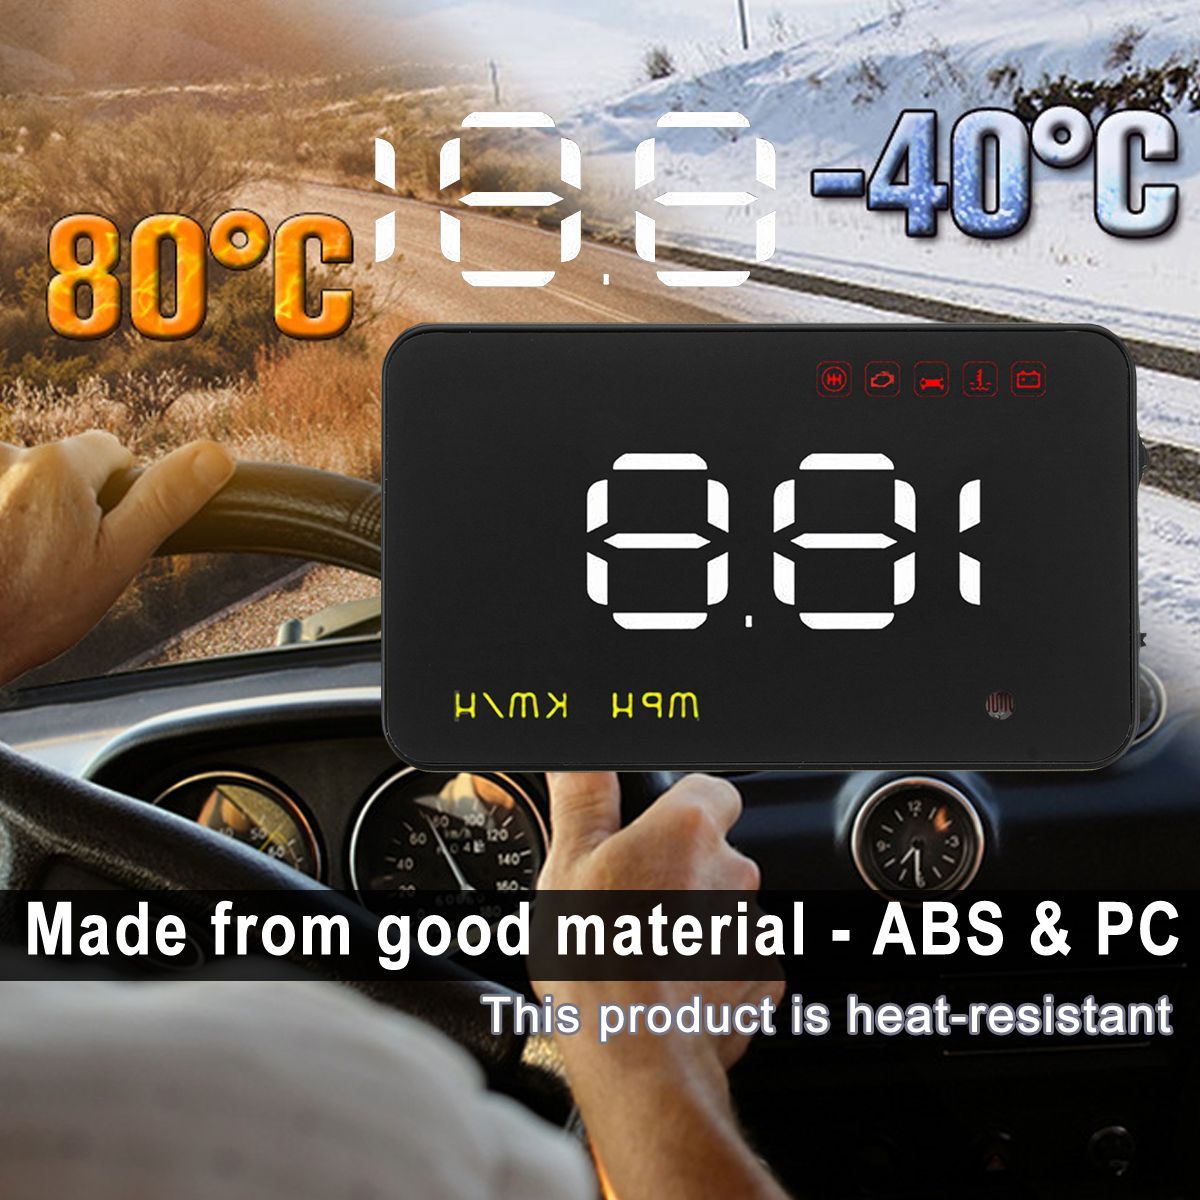 35-Inch-Uinversal-Car-HUD-Head-Up-Display-LCD-OBD2-Overspeed-Warning-System-1313743